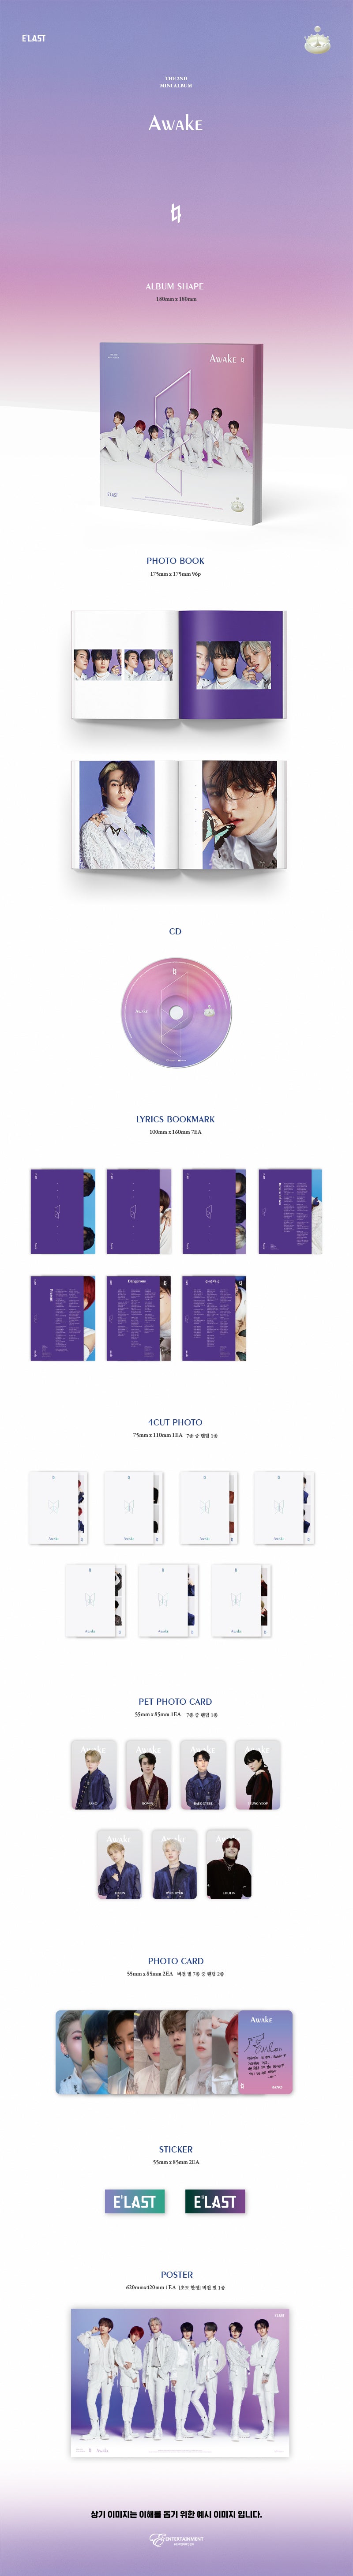 1 CD
1 Photo Book (96 pages)
7 Lyrics Bookmarks
1 4-cut Photo
1 Pet Photo Card
2 Photo Cards
2 Stickers